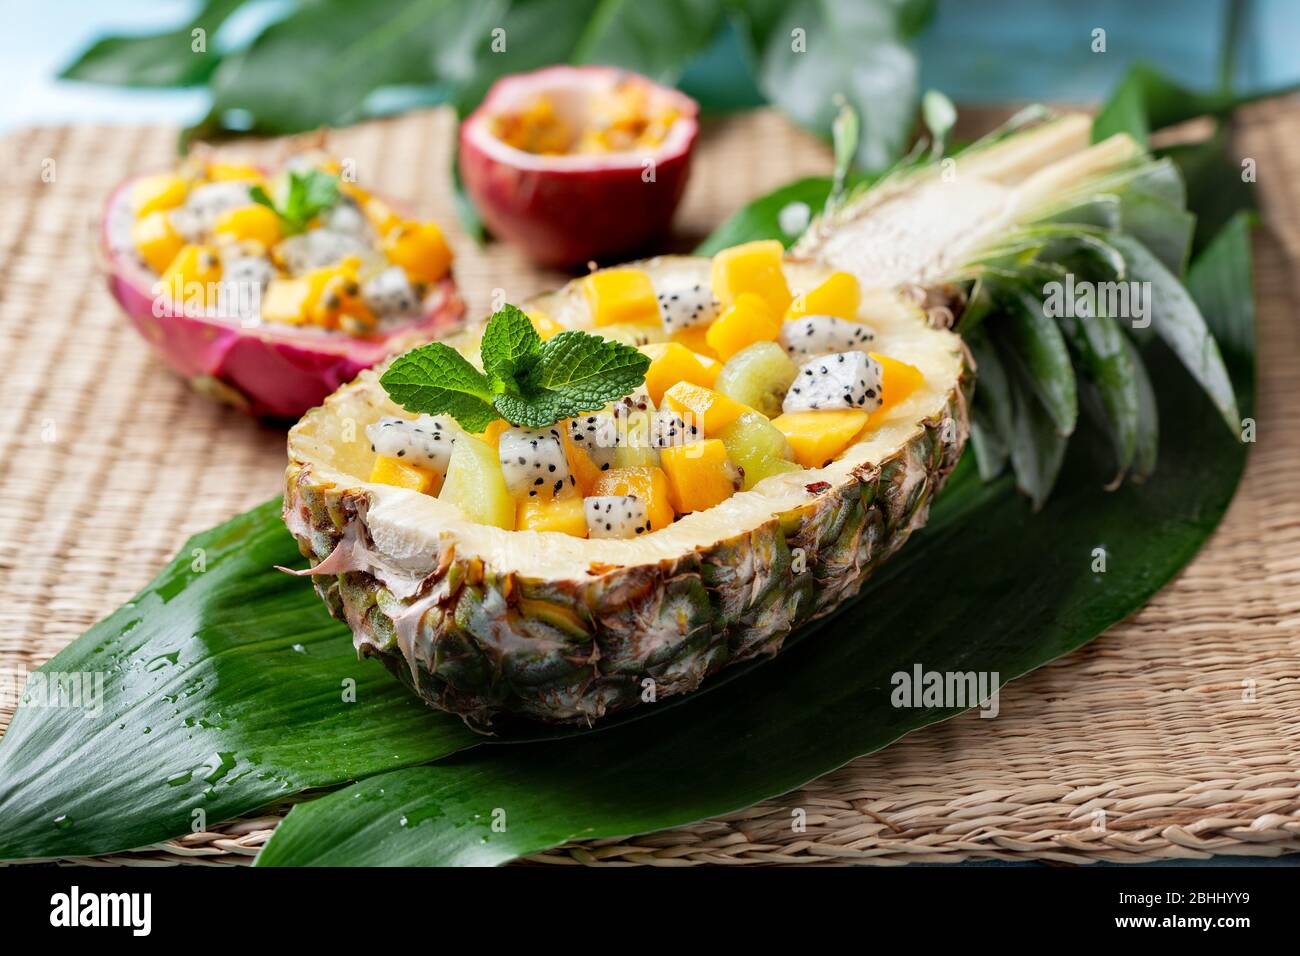 tropical fruit salad in a pineapple half on a straw background Stock Photo